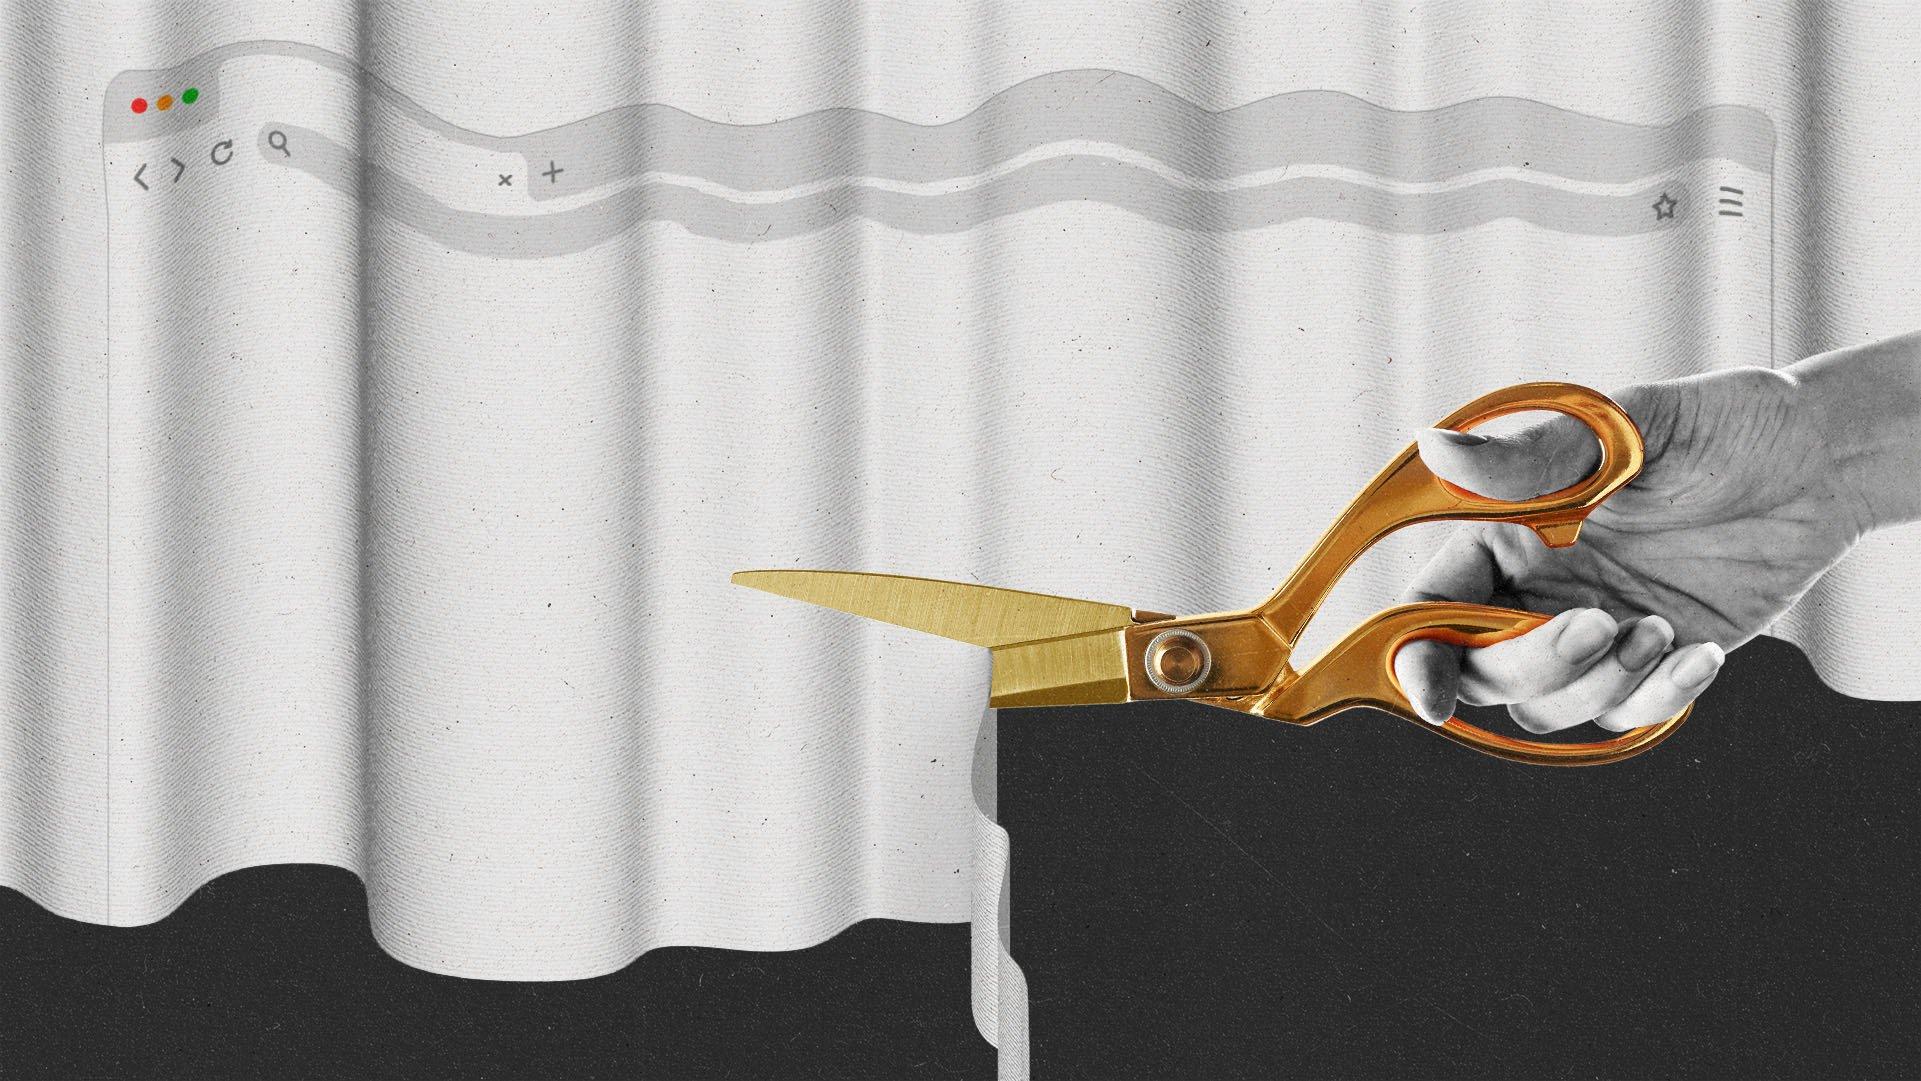 A hand holding gold tailor's shears cuts a piece of fabric with a browser window on it